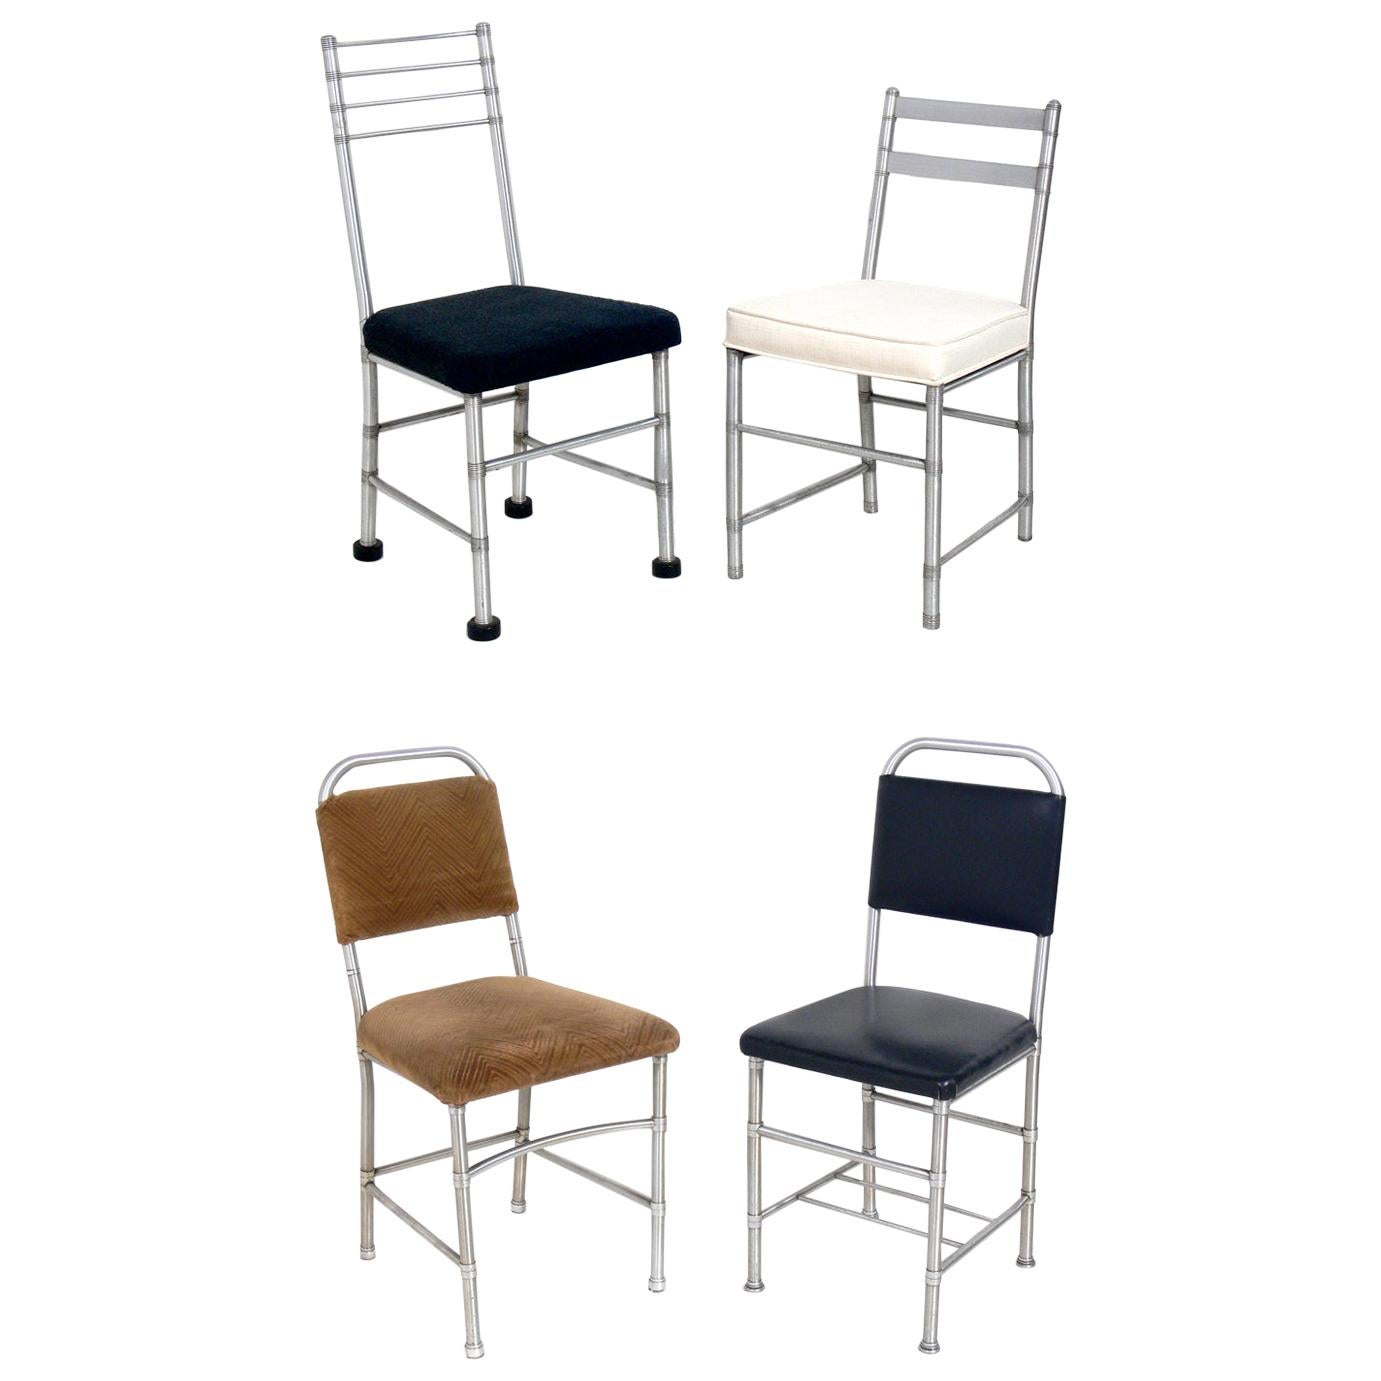 Selection of Warren McArthur Chairs